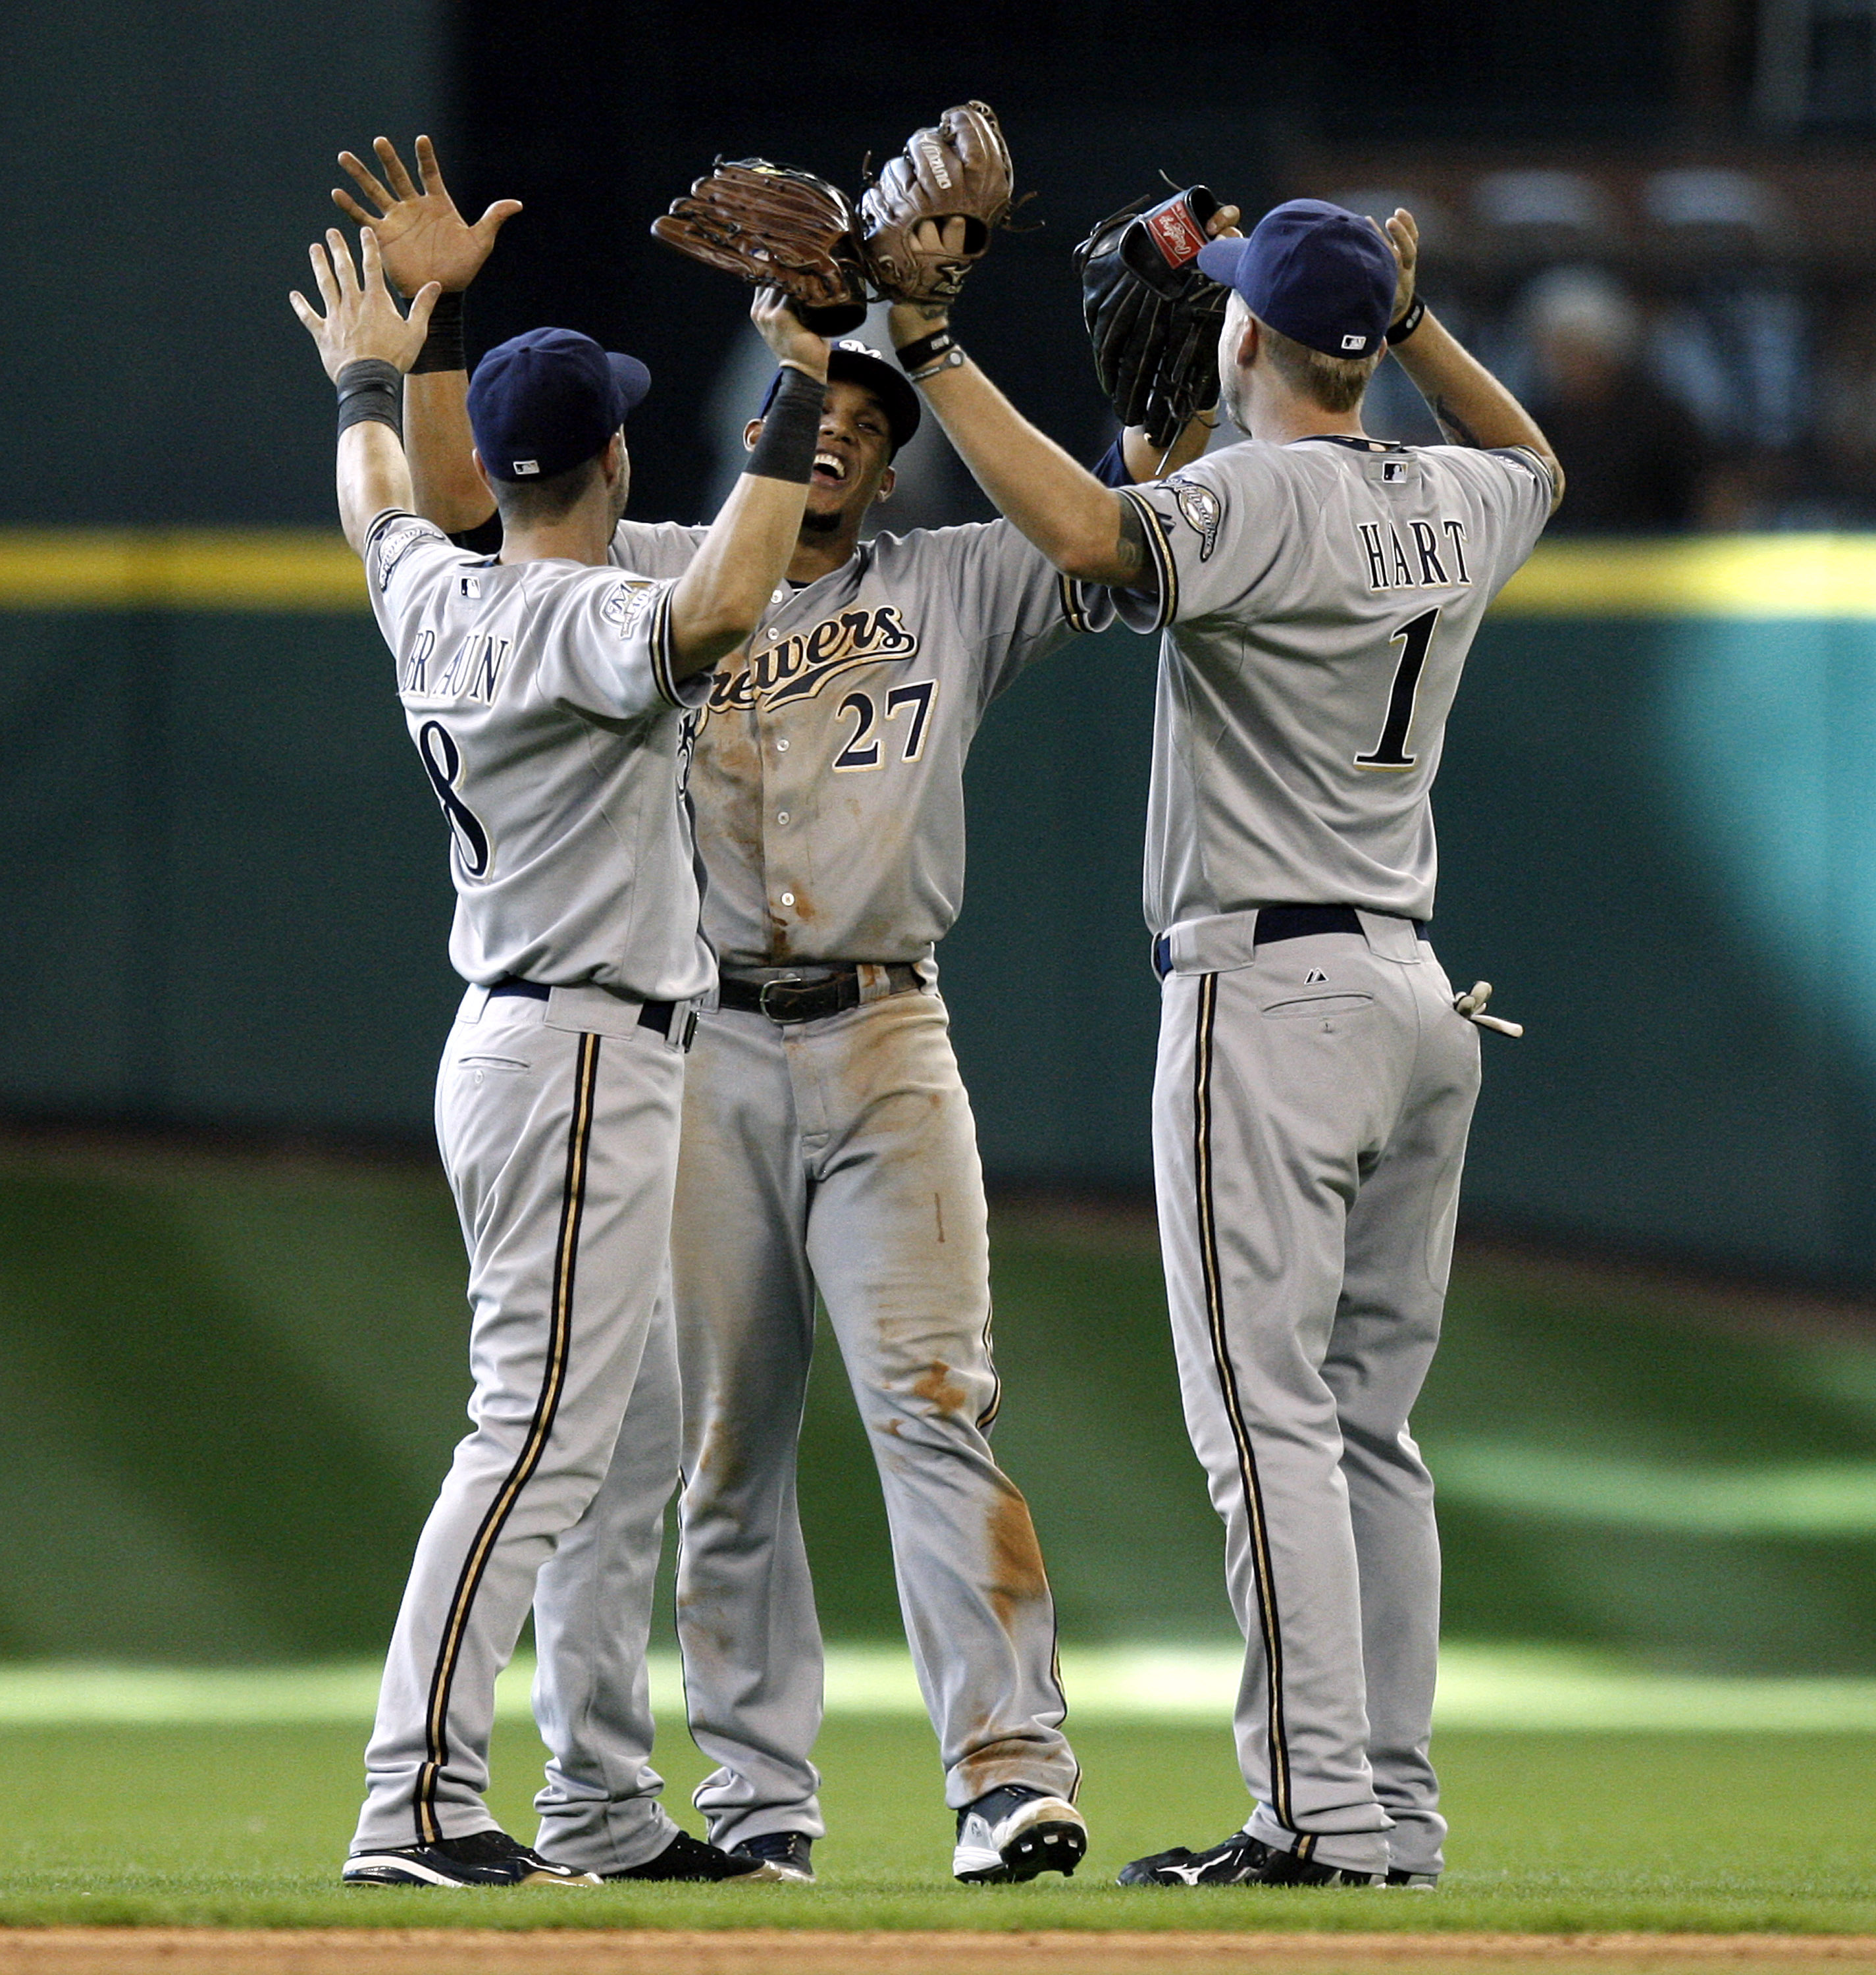 Brewers By the (Jersey) Numbers '15 – #27 Carlos Gomez